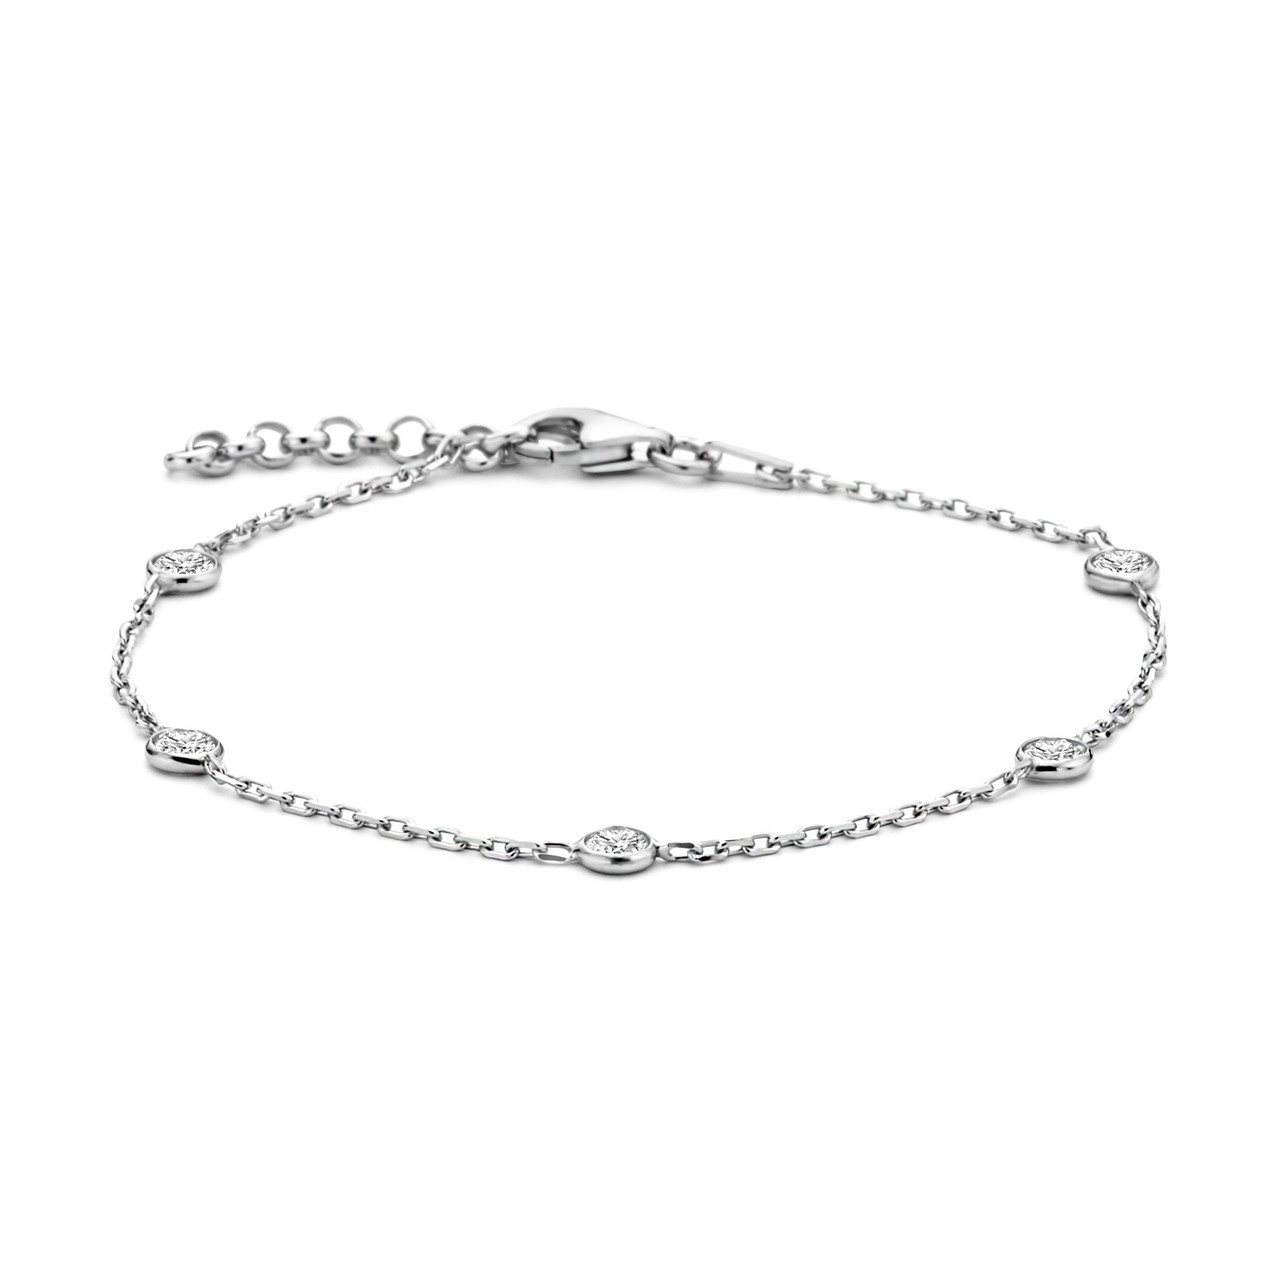 Professional China Tennis Bracelet - Mila Elodie 925 sterling silver bracelet with zirconia – XH&SILVER